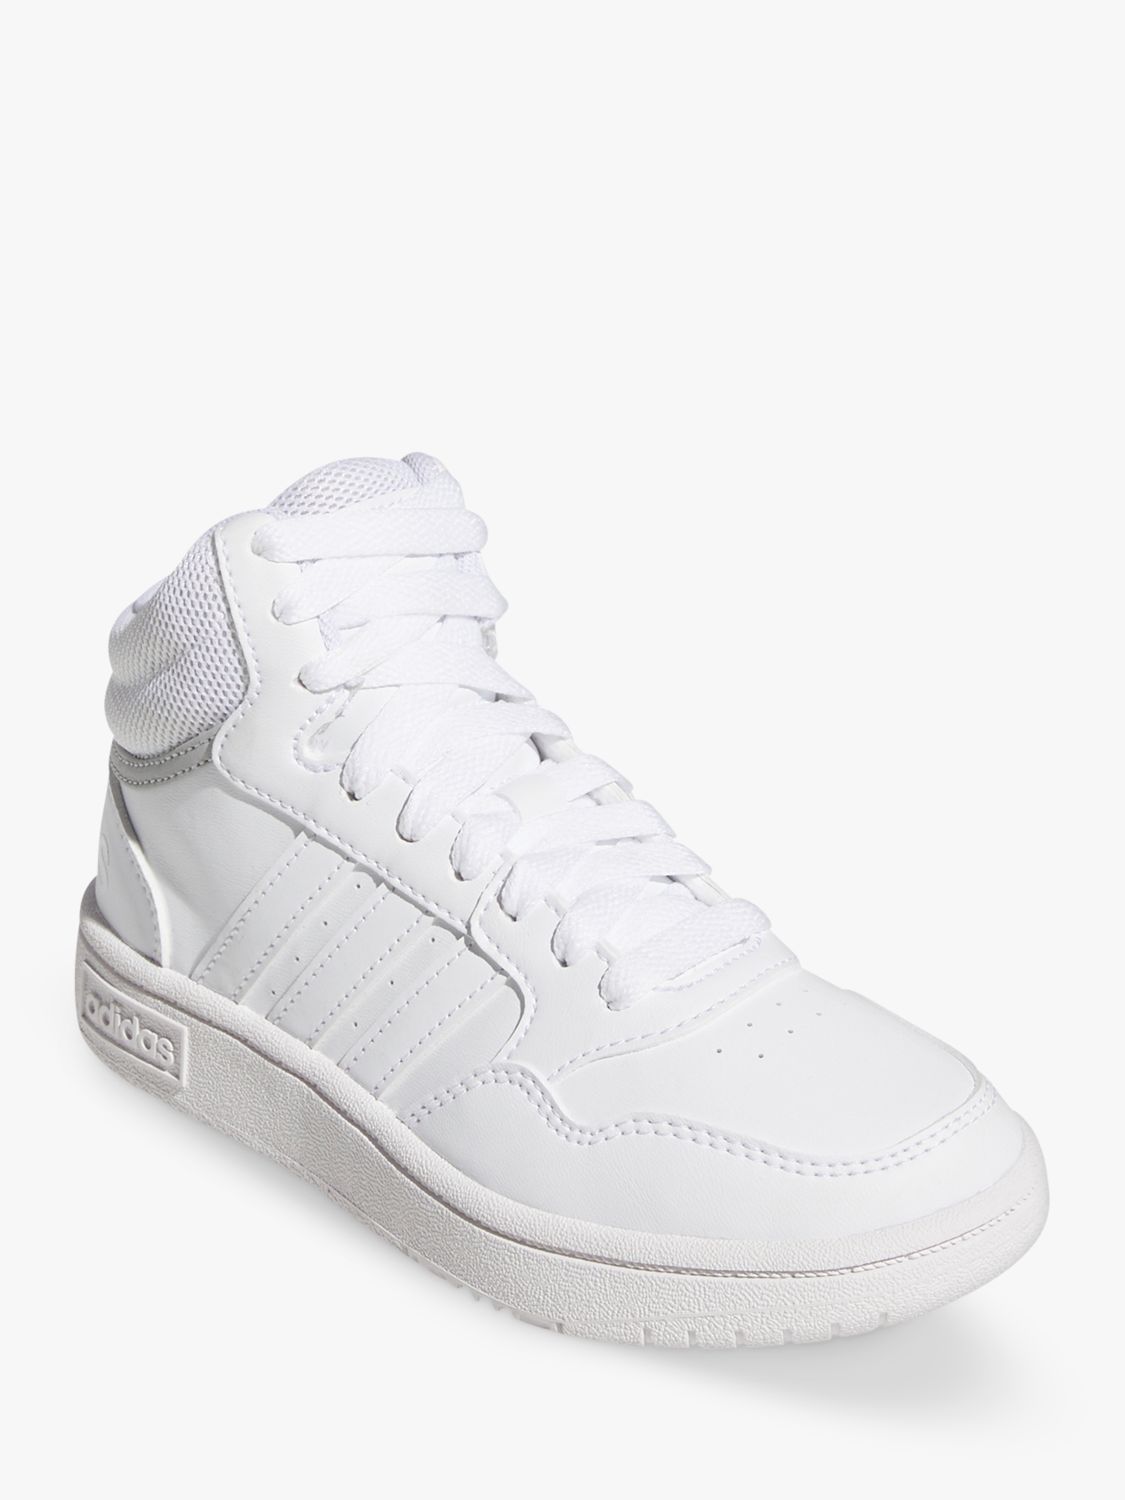 adidas Kids' Hoops Mid Trainers, FTWR White/Grey Two at John Lewis ...